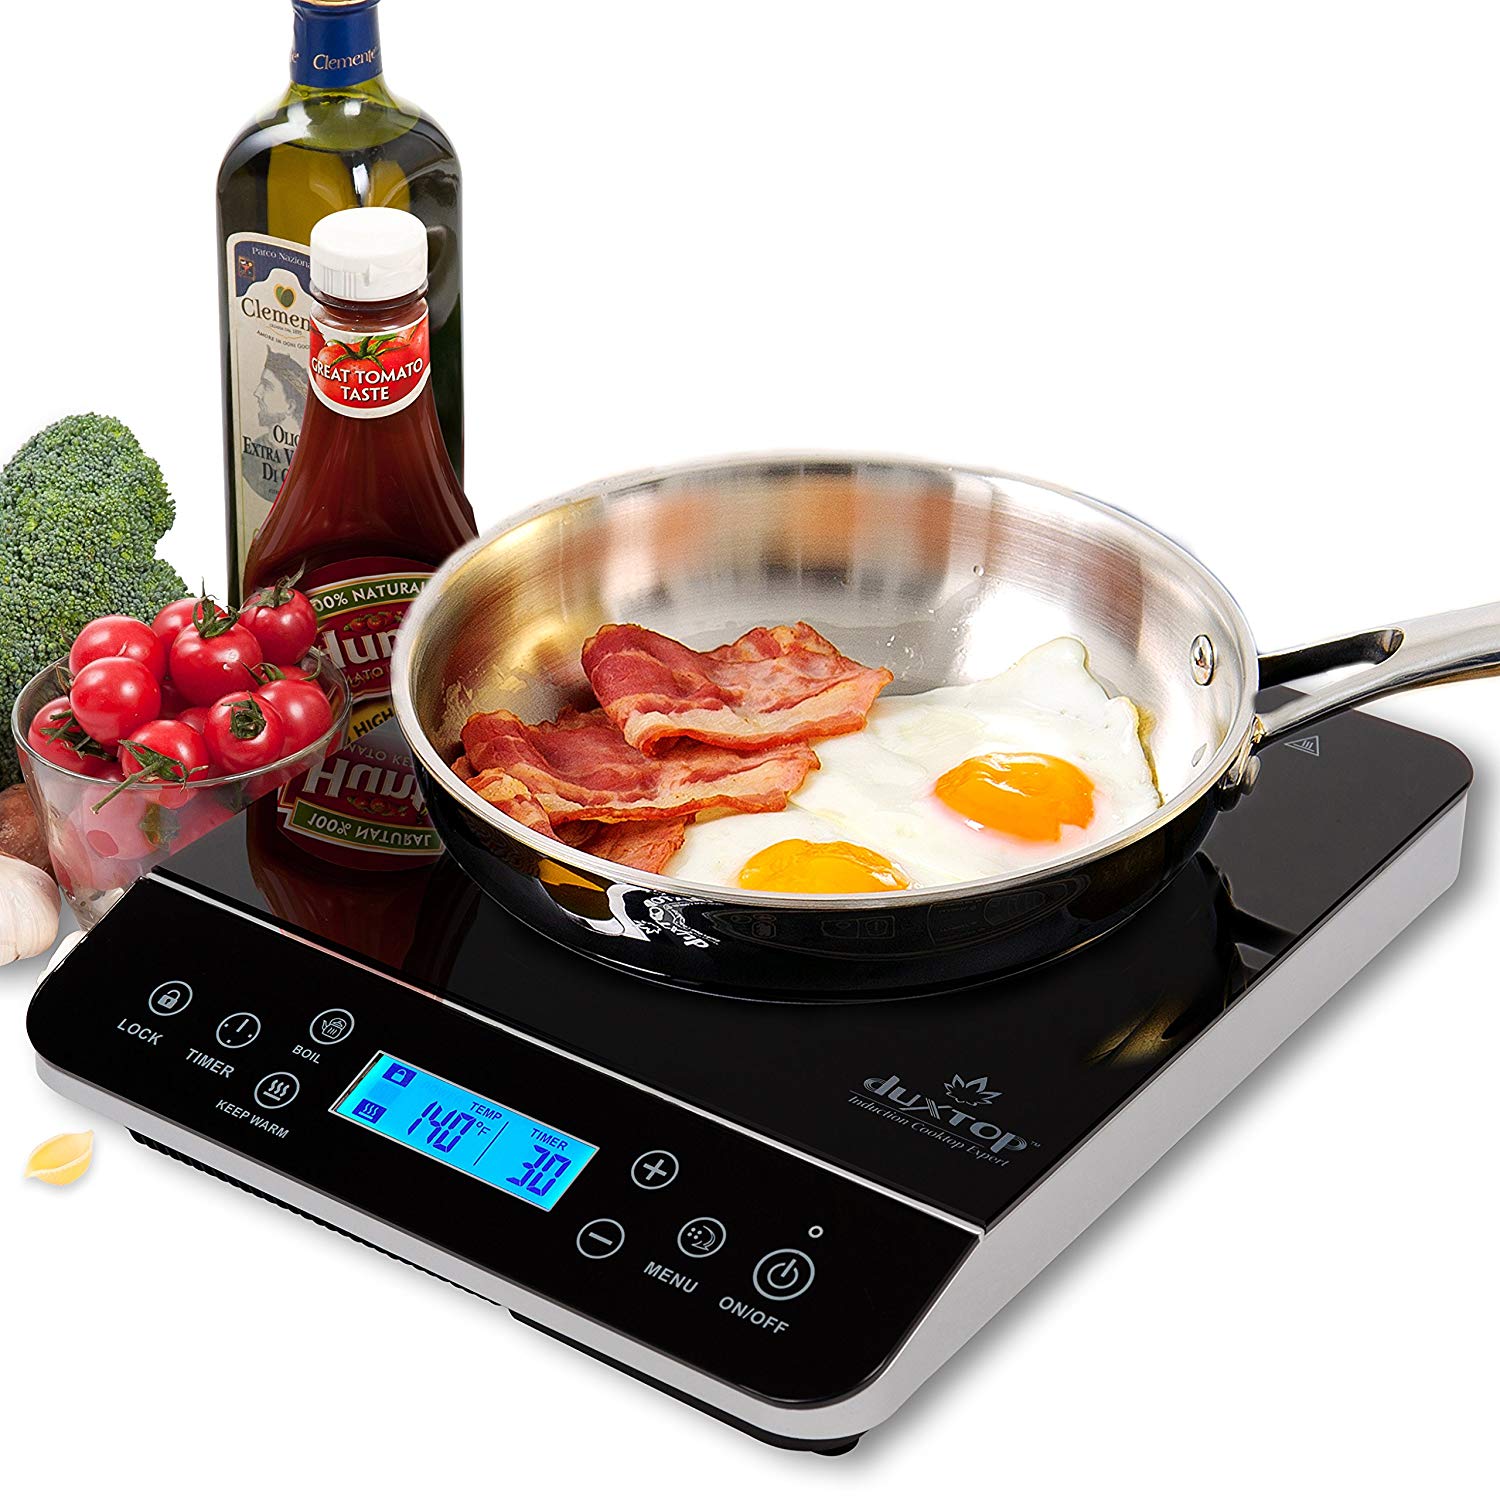 Today only: Duxtop LCD 1800-watt portable induction cooktop for $75